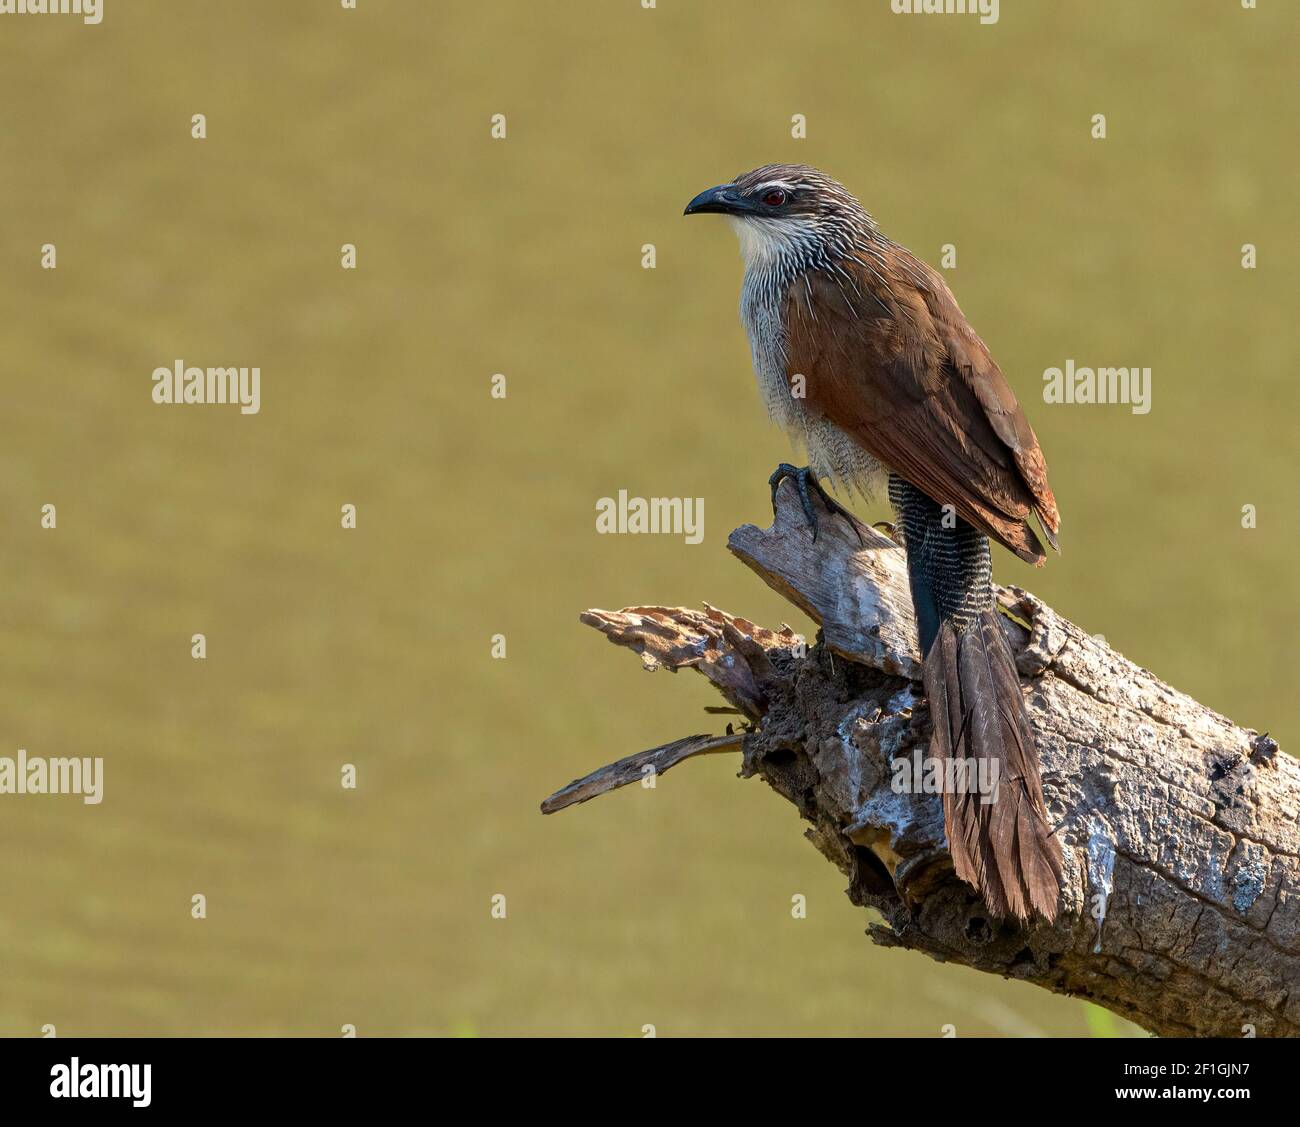 White-browed Coucal (Centropus superclious) or Lark-heeled cuckoo perched on a limb over water Stock Photo